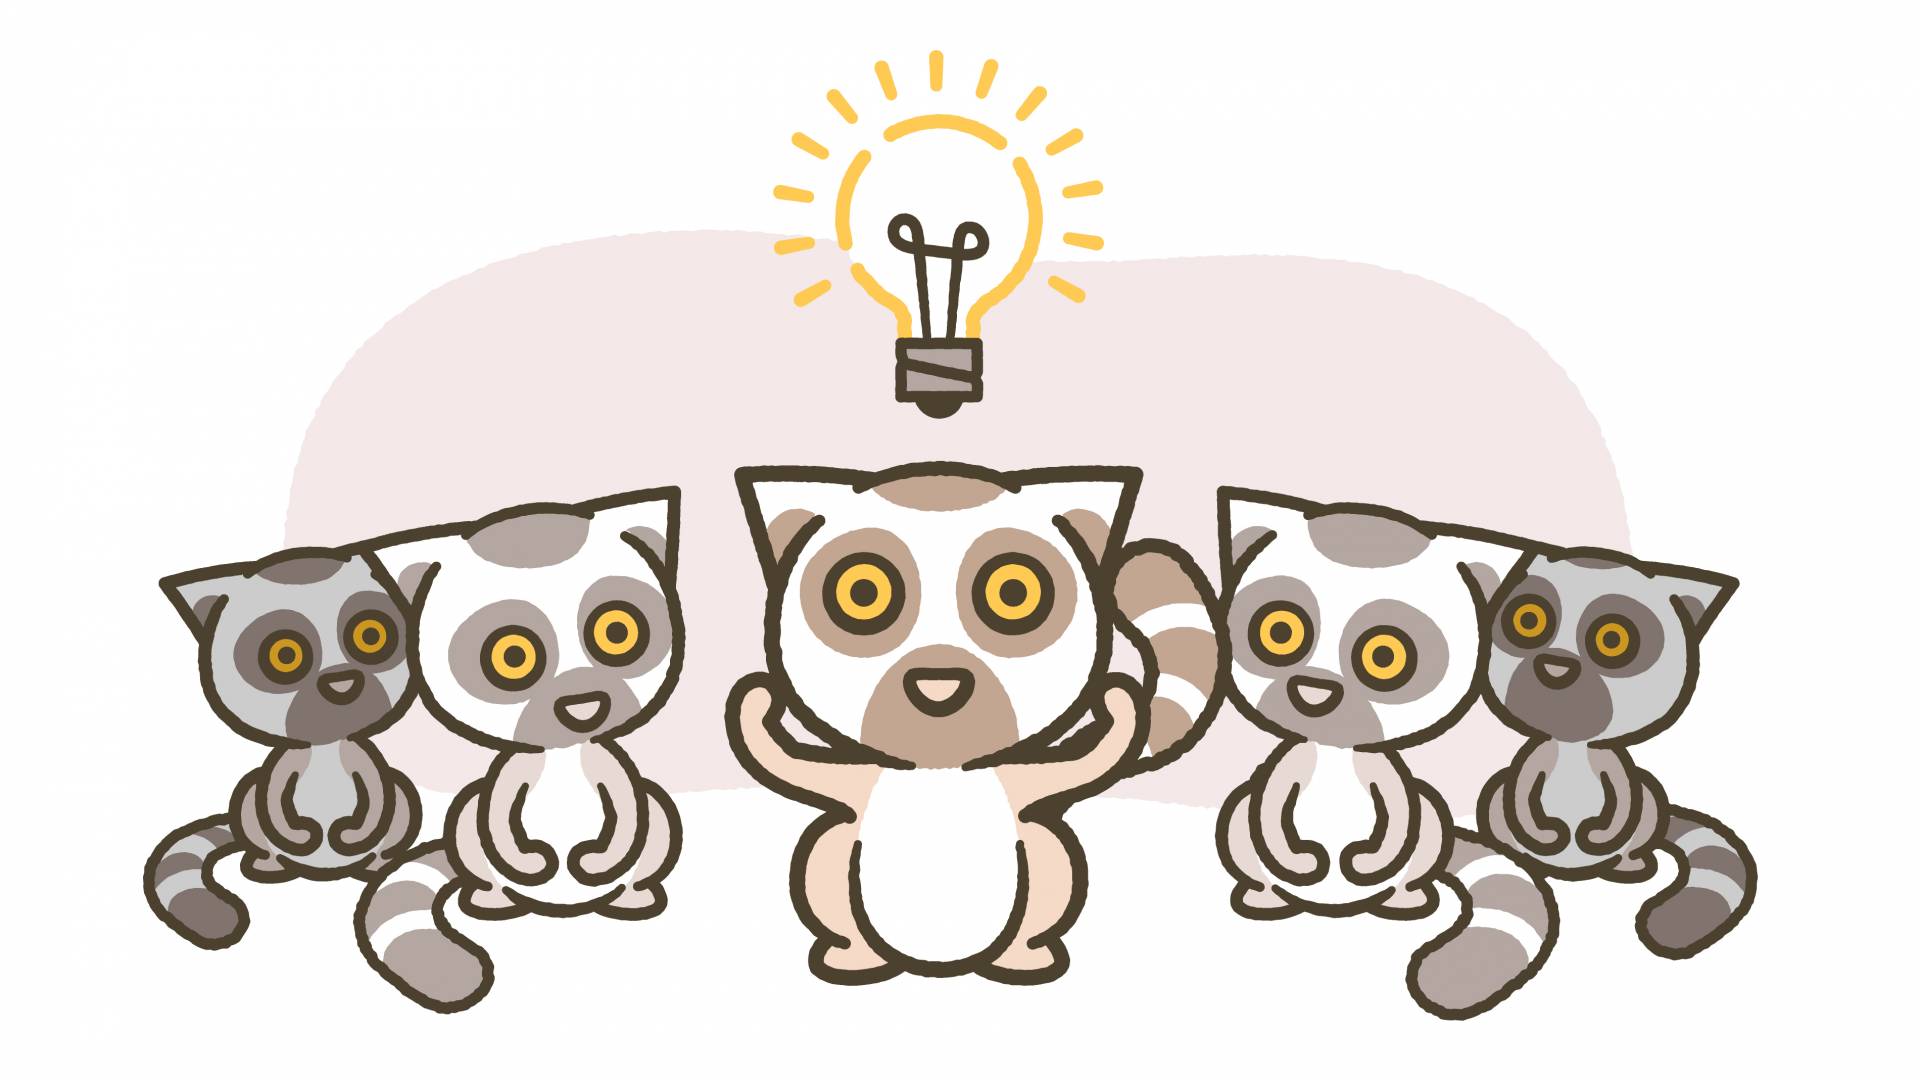 One lemur with a lightbulb over its head while other lemurs look on